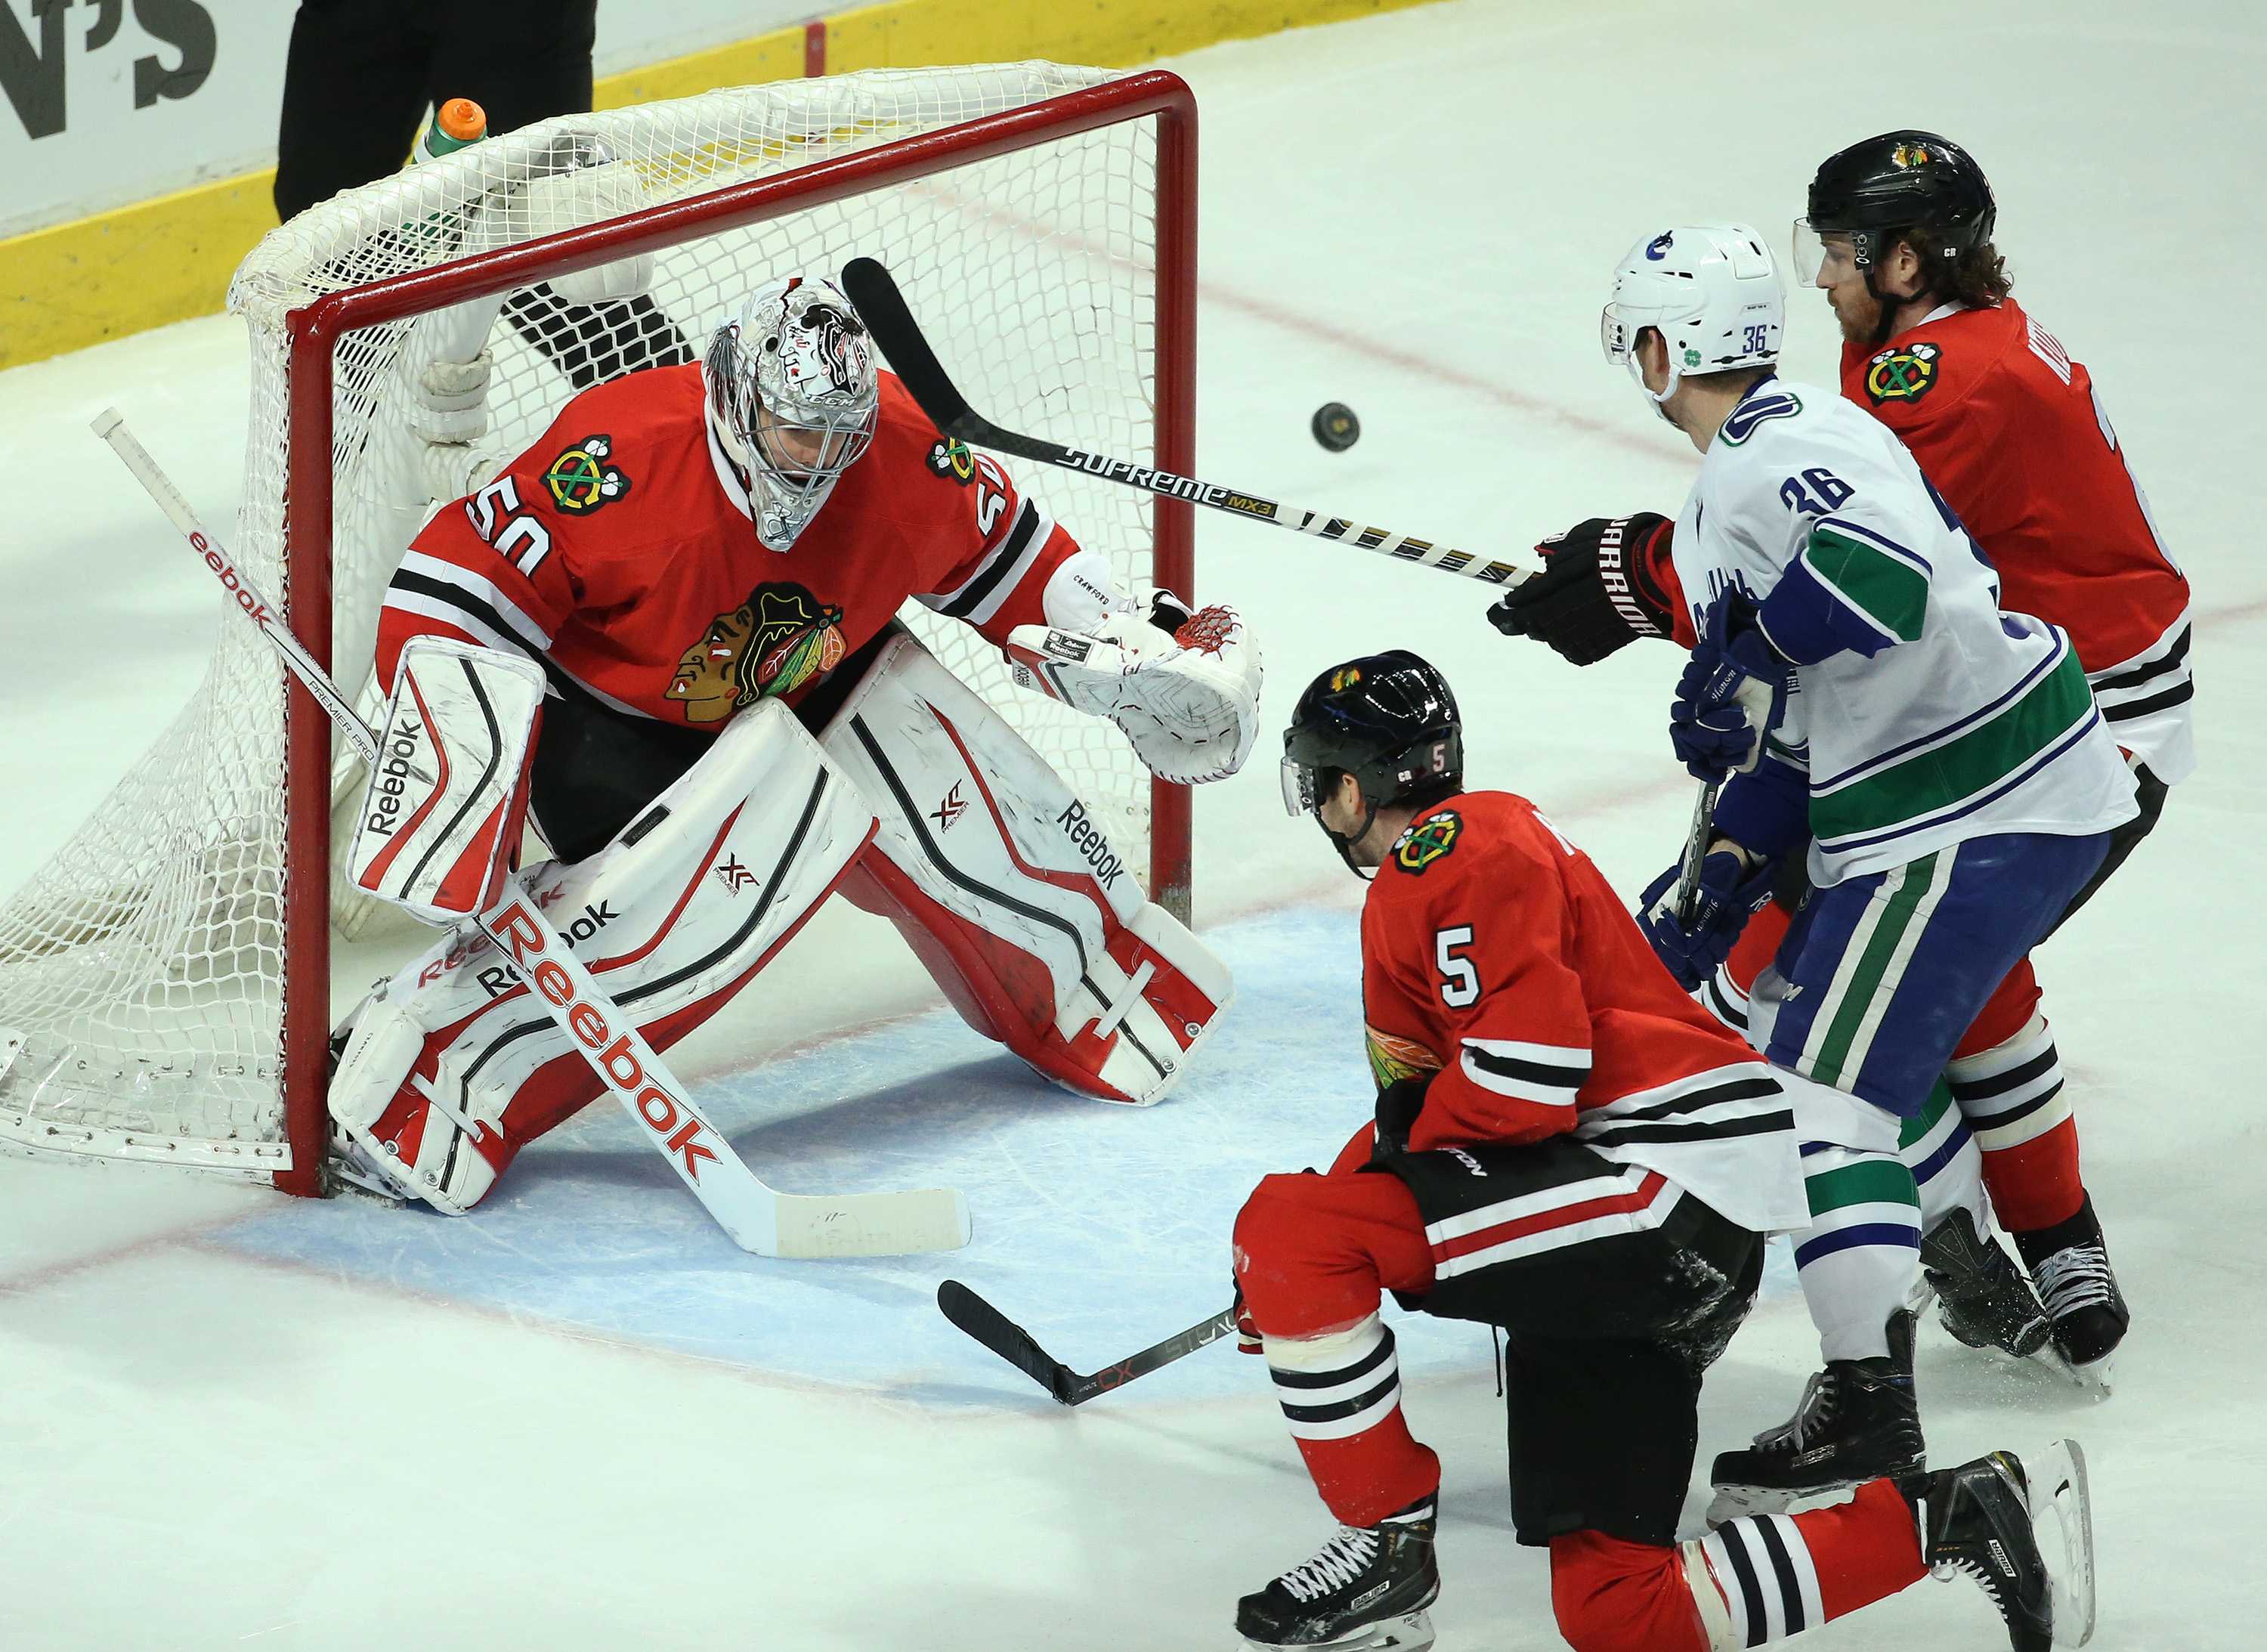 Chicago Blackhawks goalie Corey Crawford (50) defends his net against the Vancouver Canucks in the second period at the United Center in Chicago on Wednesday, Feb. 11, 2015. (John J. Kim/Chicago Tribune/TNS)